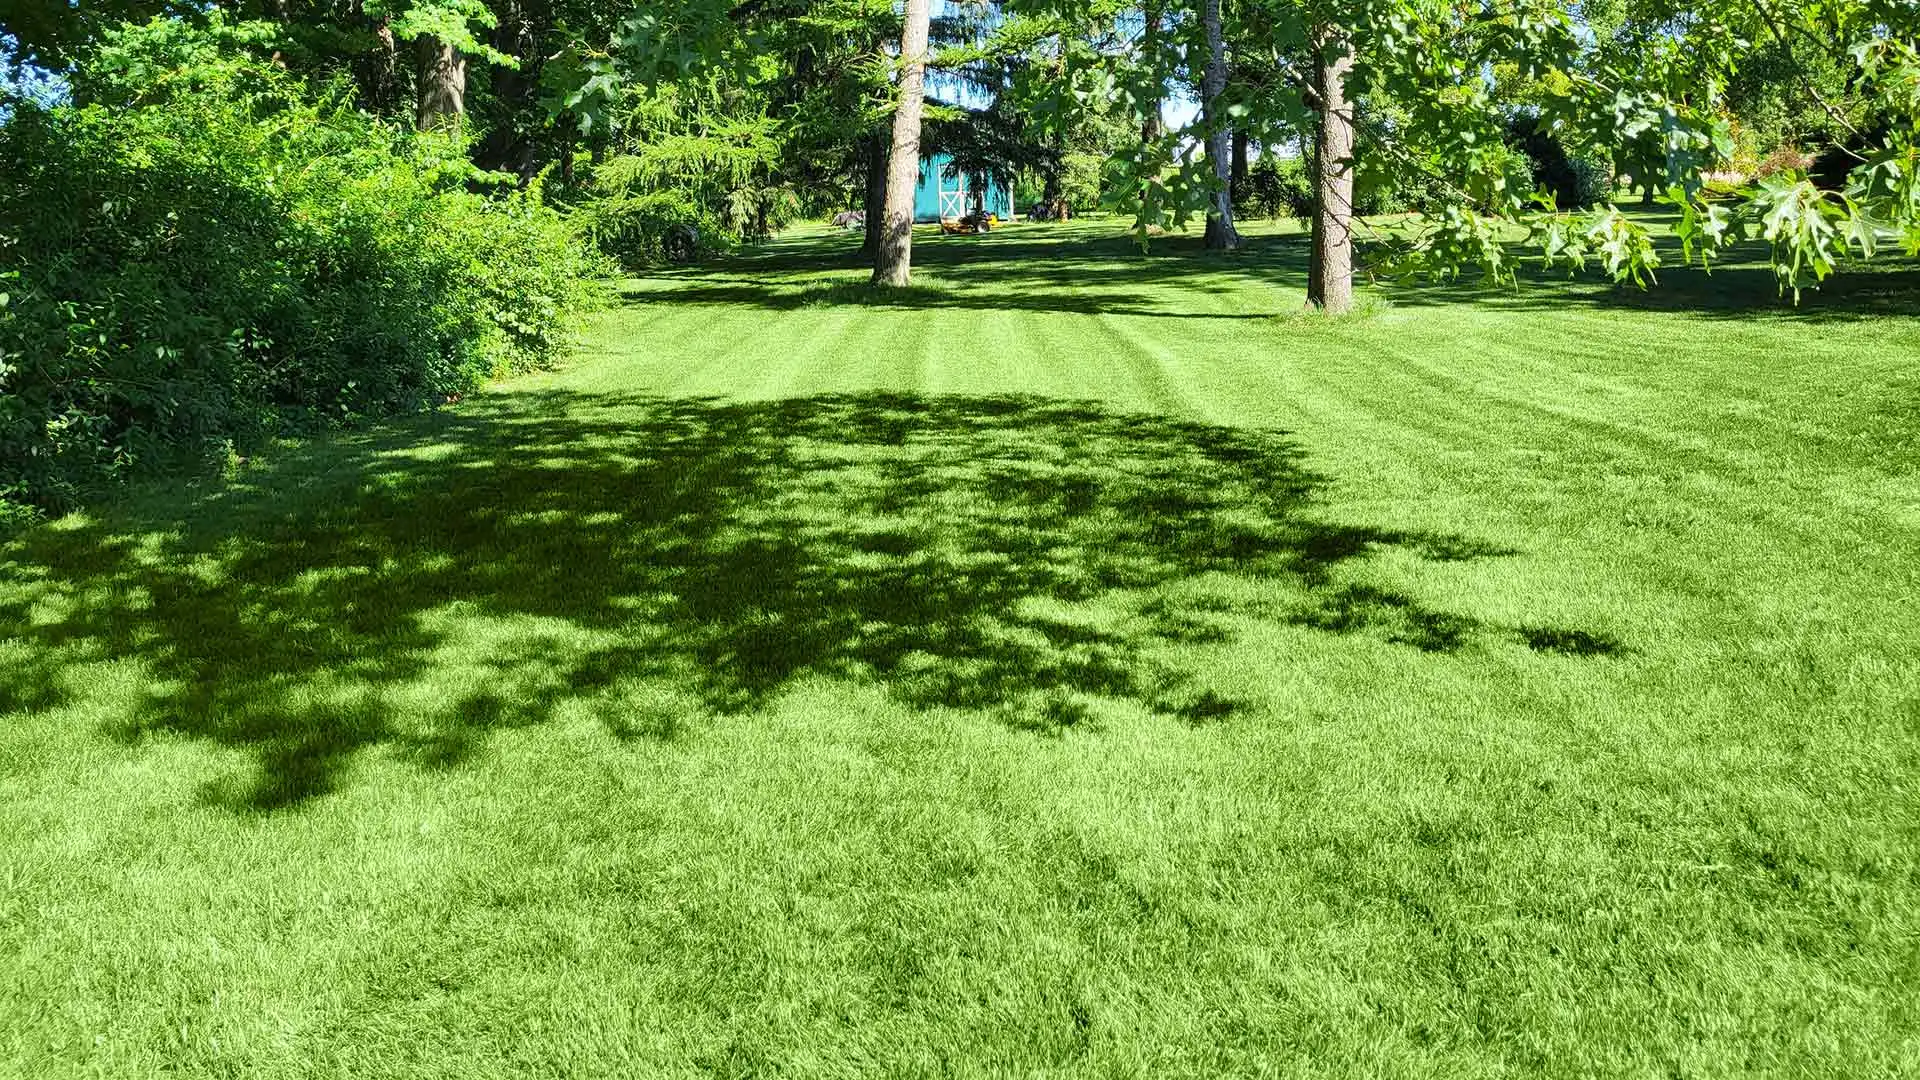 4 Lawn Care Services to Schedule Now for the Fall Season